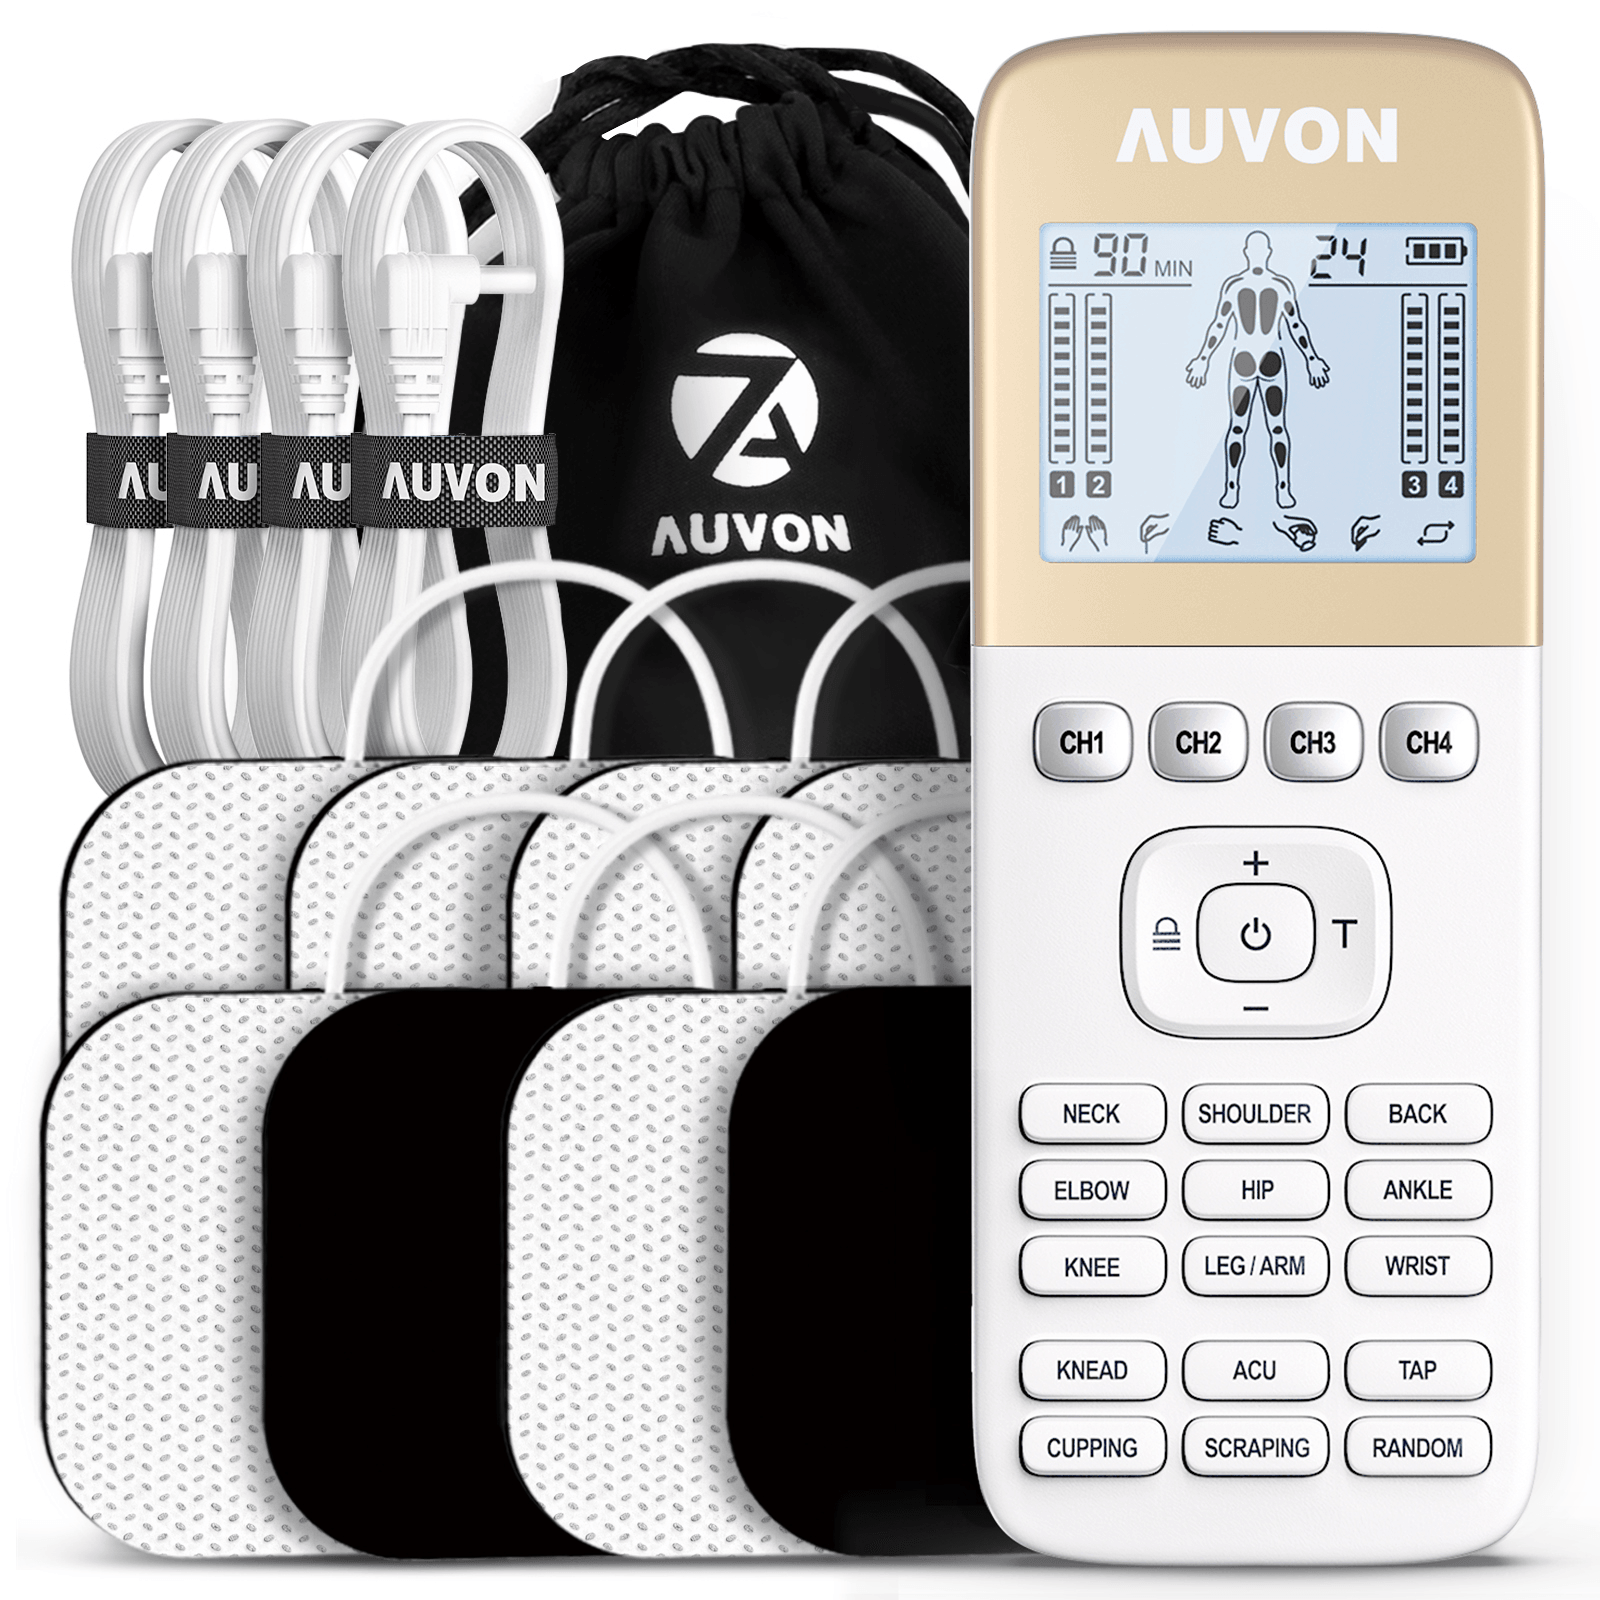 https://auvonhealth.com/cdn/shop/files/auvon-4-outputs-h1-tens-unit-24-modes-muscle-stimulator-for-pain-relief-rechargeable-tens-ems-machine-with-easy-to-select-button-design-2x-battery-life-dust-proof-bag-and-8-electrode_274d6301-4a84-4269-9146-12518456119f.png?v=1686019700